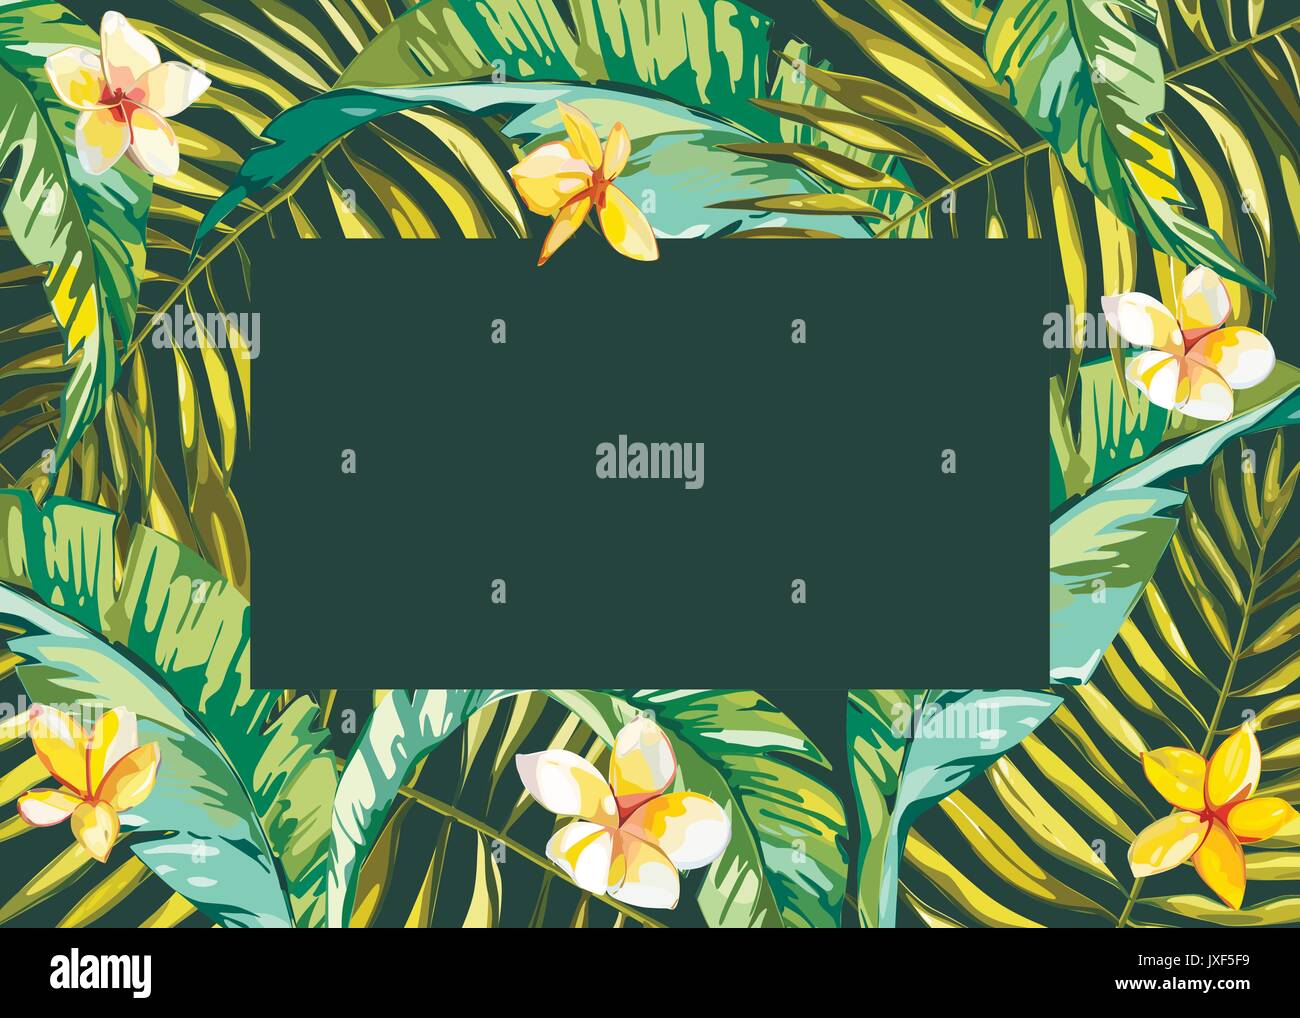 Tropical leafs composition background. Flat shapes hand drawn. Green on black with bird of plumeria flowers. EPS 10 Stock Vector